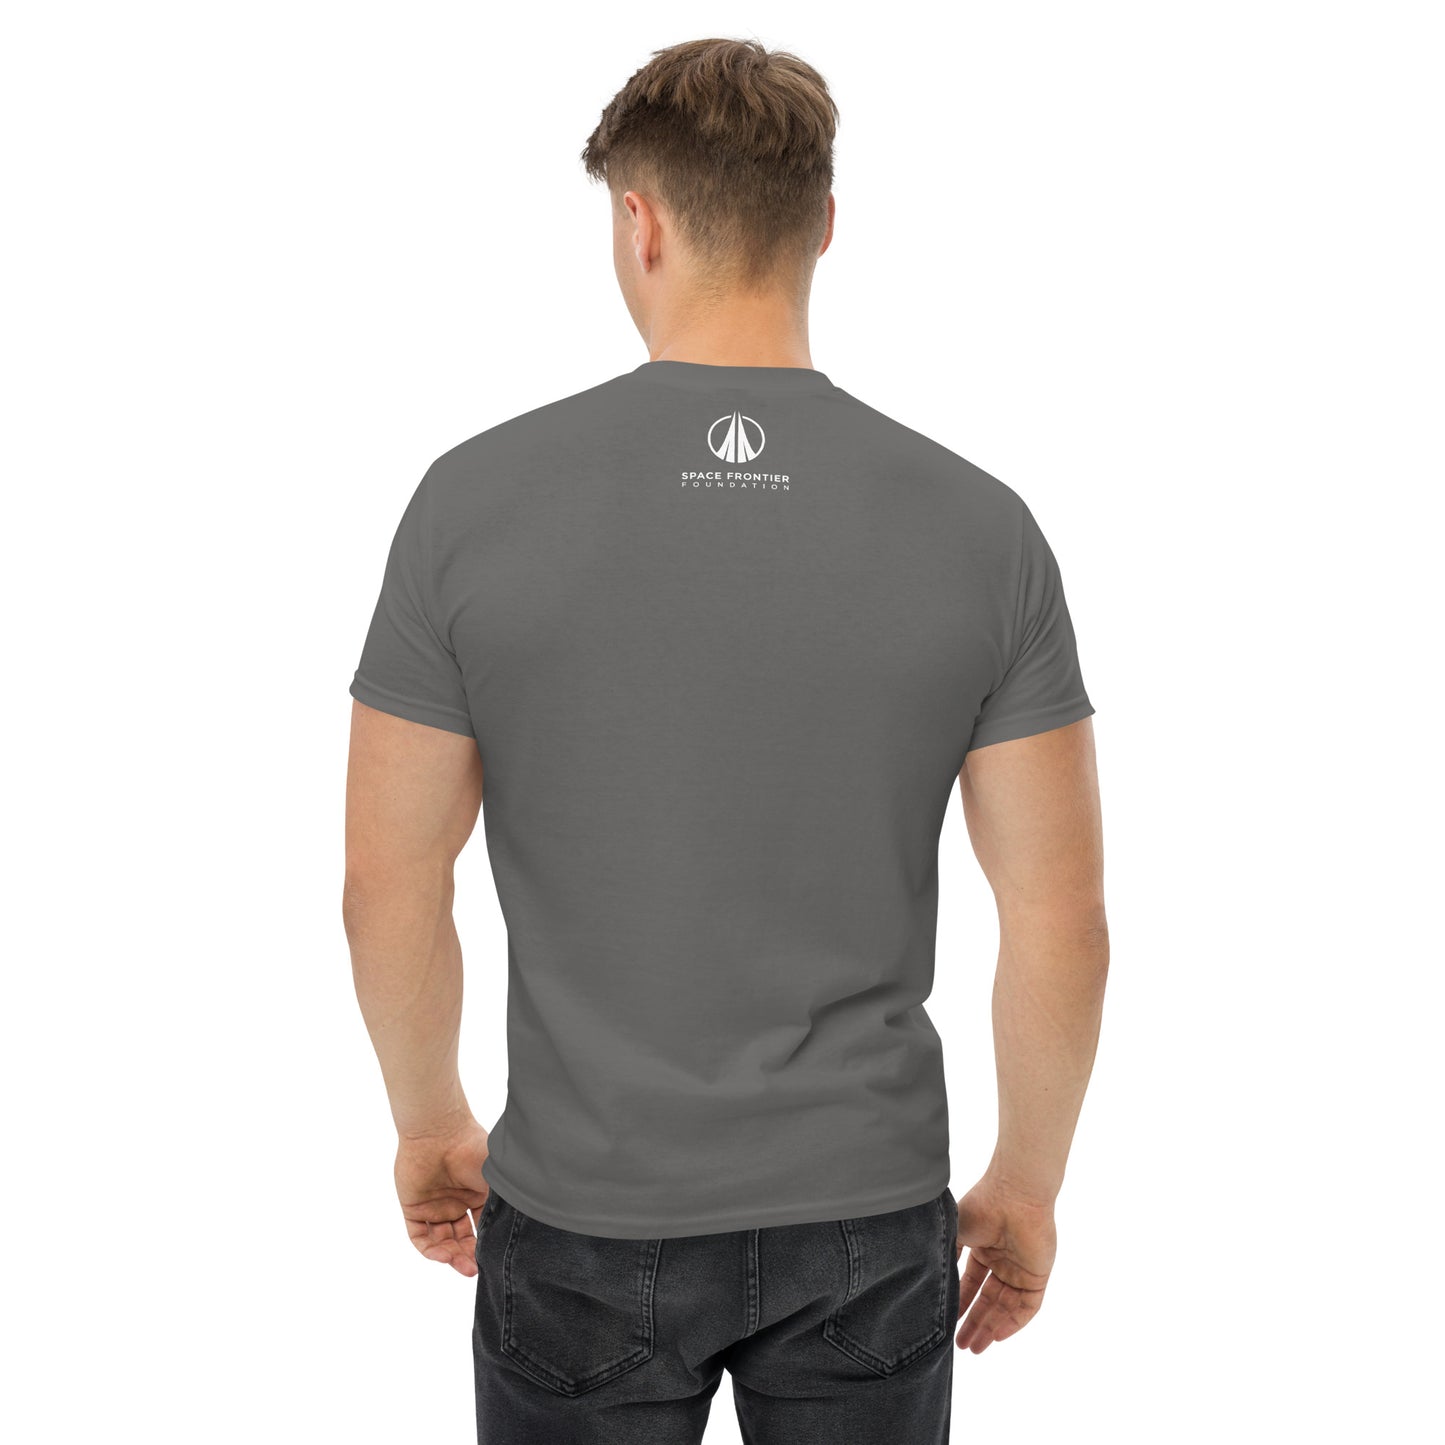 Classic Men's T-Shirt with small Foundation Logo